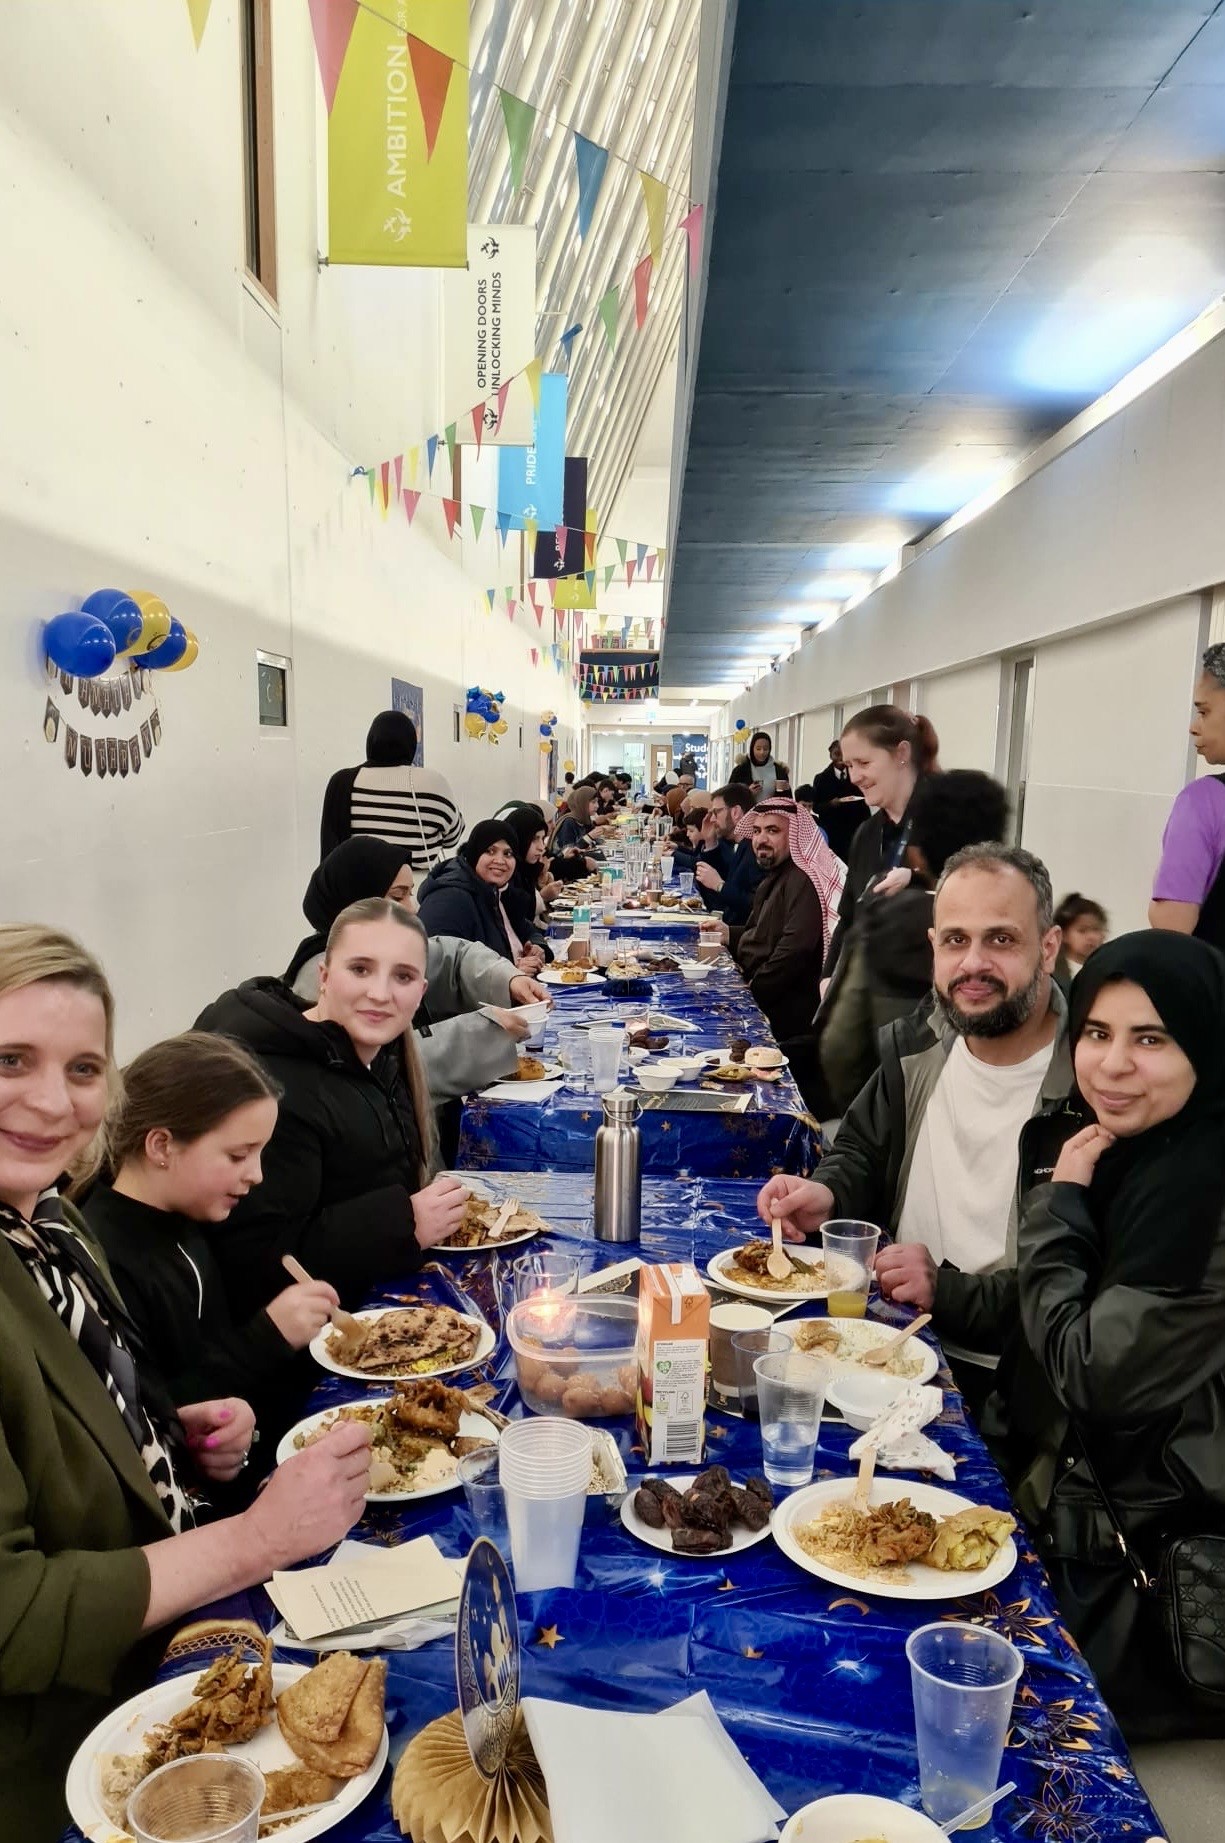 The Academy of St Francis held its first Iftar meal